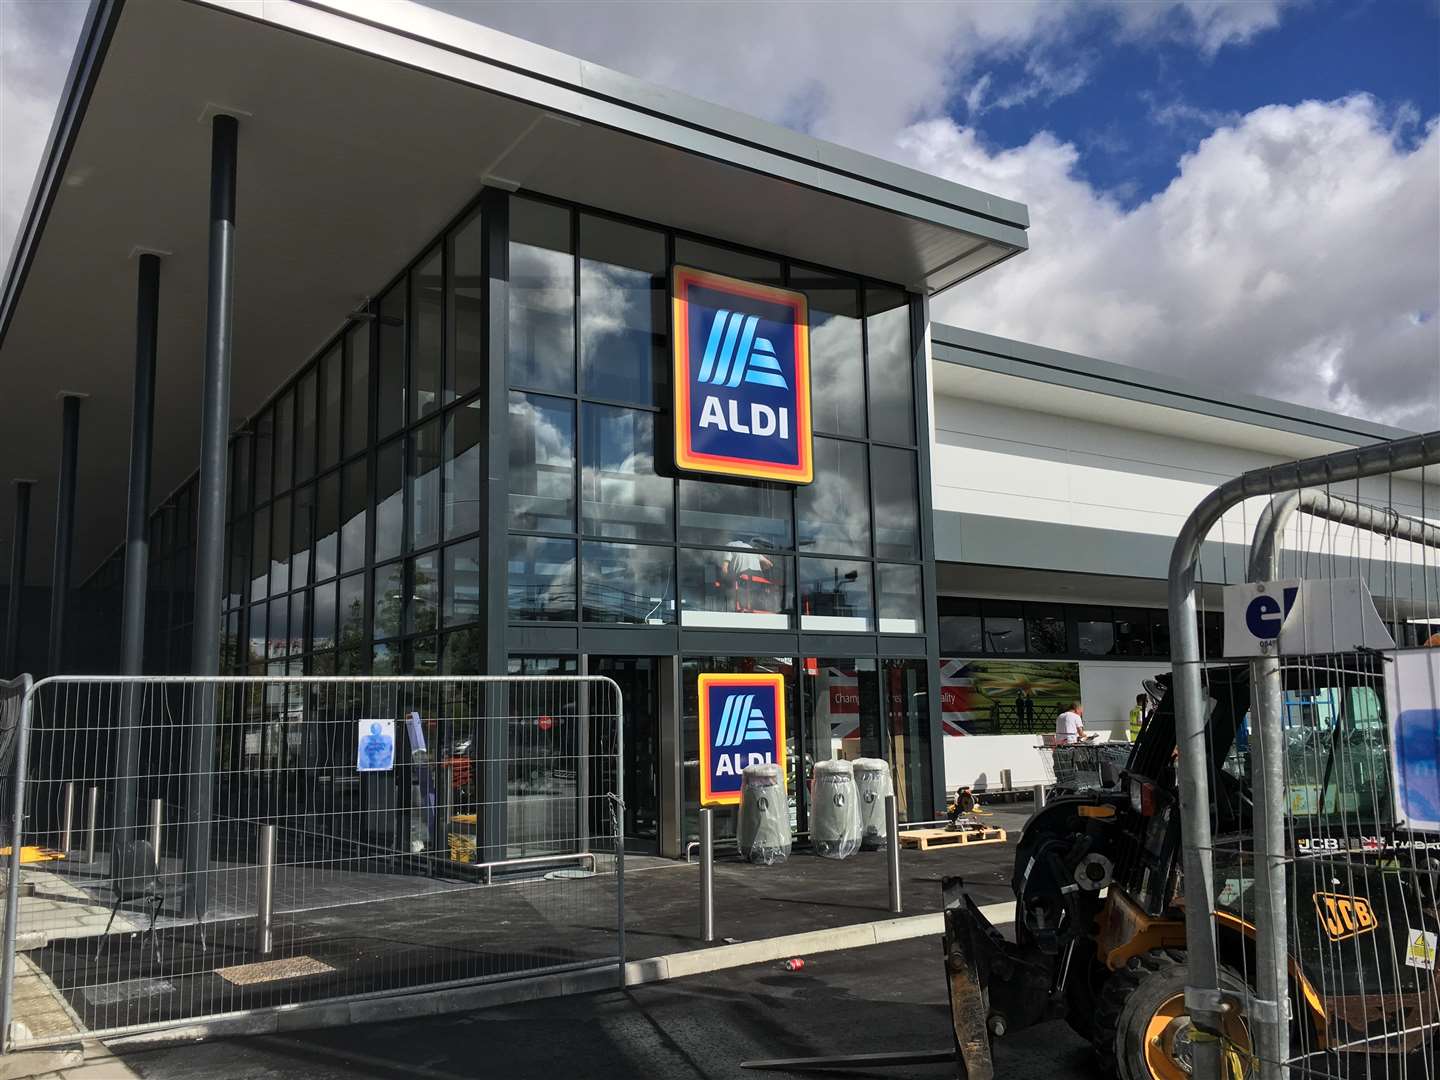 The new Aldi is nearly ready to open